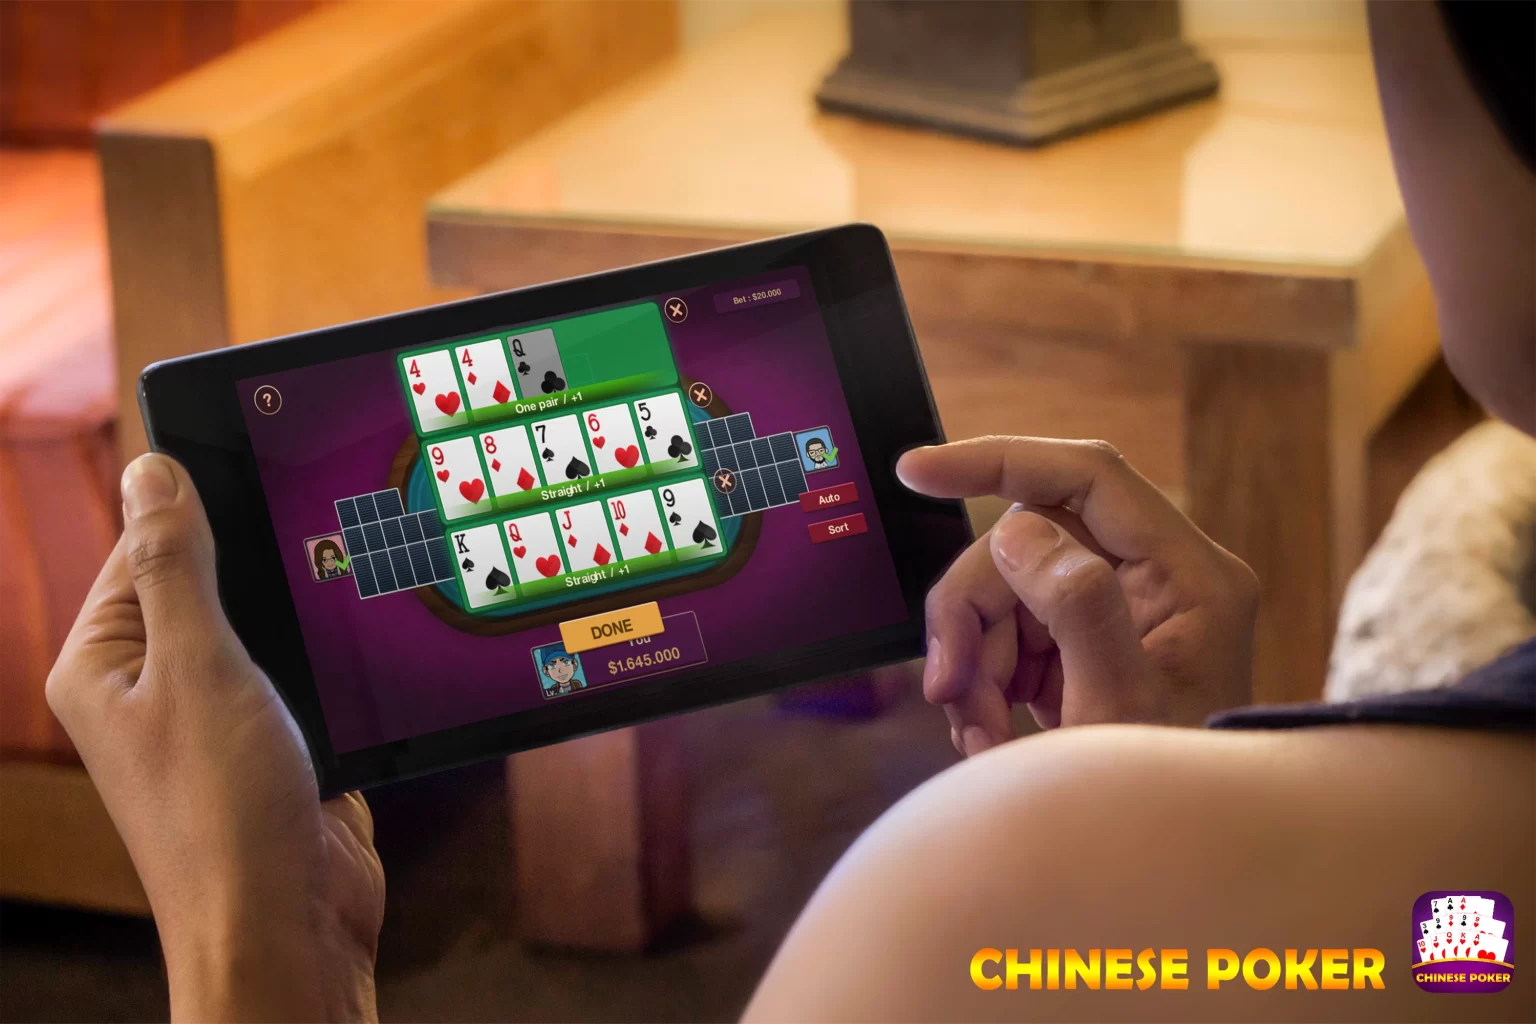 unnamed 1 1 1536x1024 - Chinese Poker Mod Apk V1.119 (Unlimited Money) Latest Version